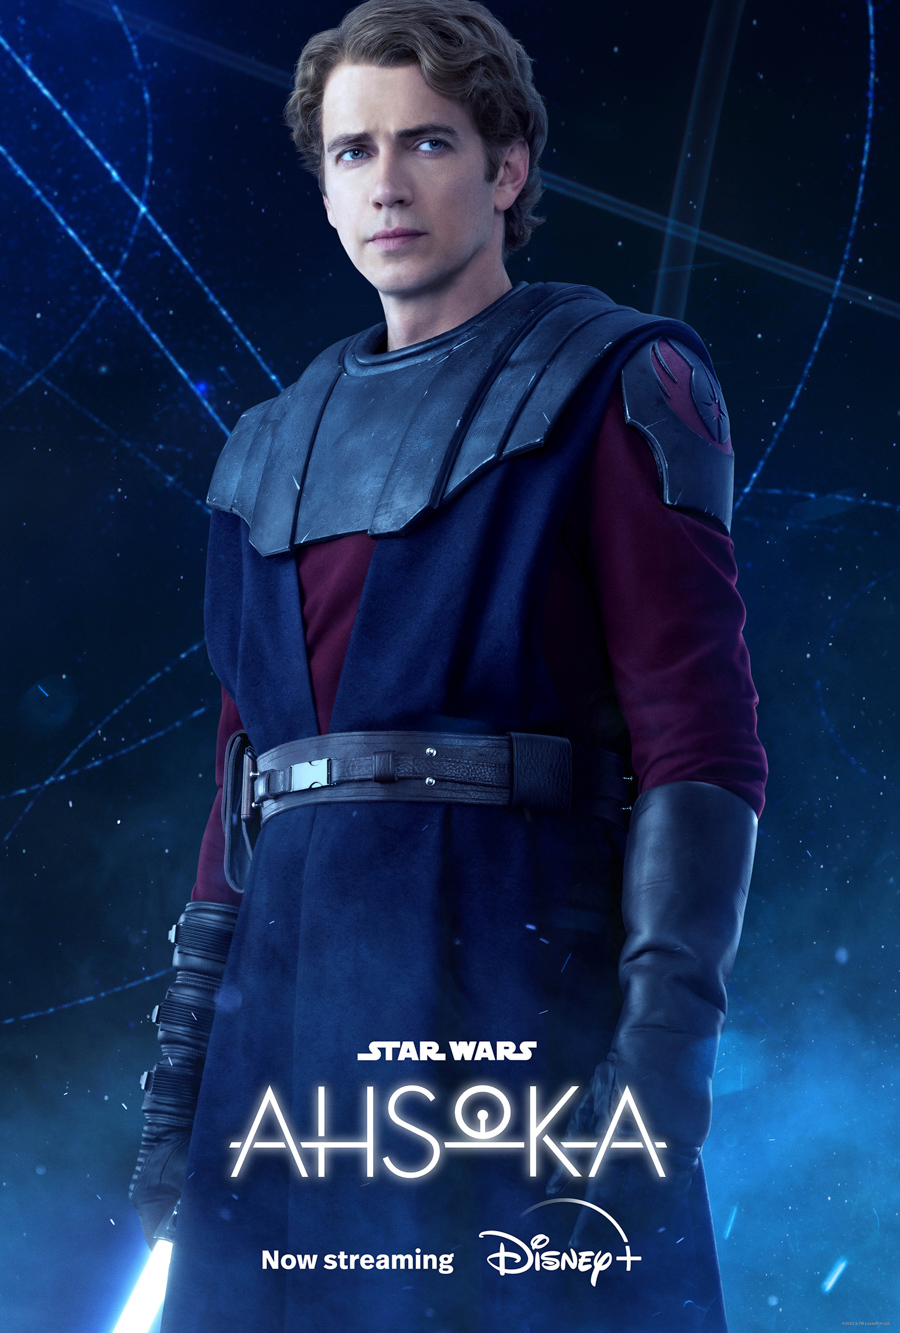 Anakin Skywalker, from Ahsoka, played by Hayden Christiansen is wearing a maroon shirt, a blue overcoat vest, black gloves, and black shoulder armor while standing in front of a blue galaxy background. Star Wars Ahsoka is written in white on the bottom with now streaming written beneath that with the Disney plus logo written beside now streaming.